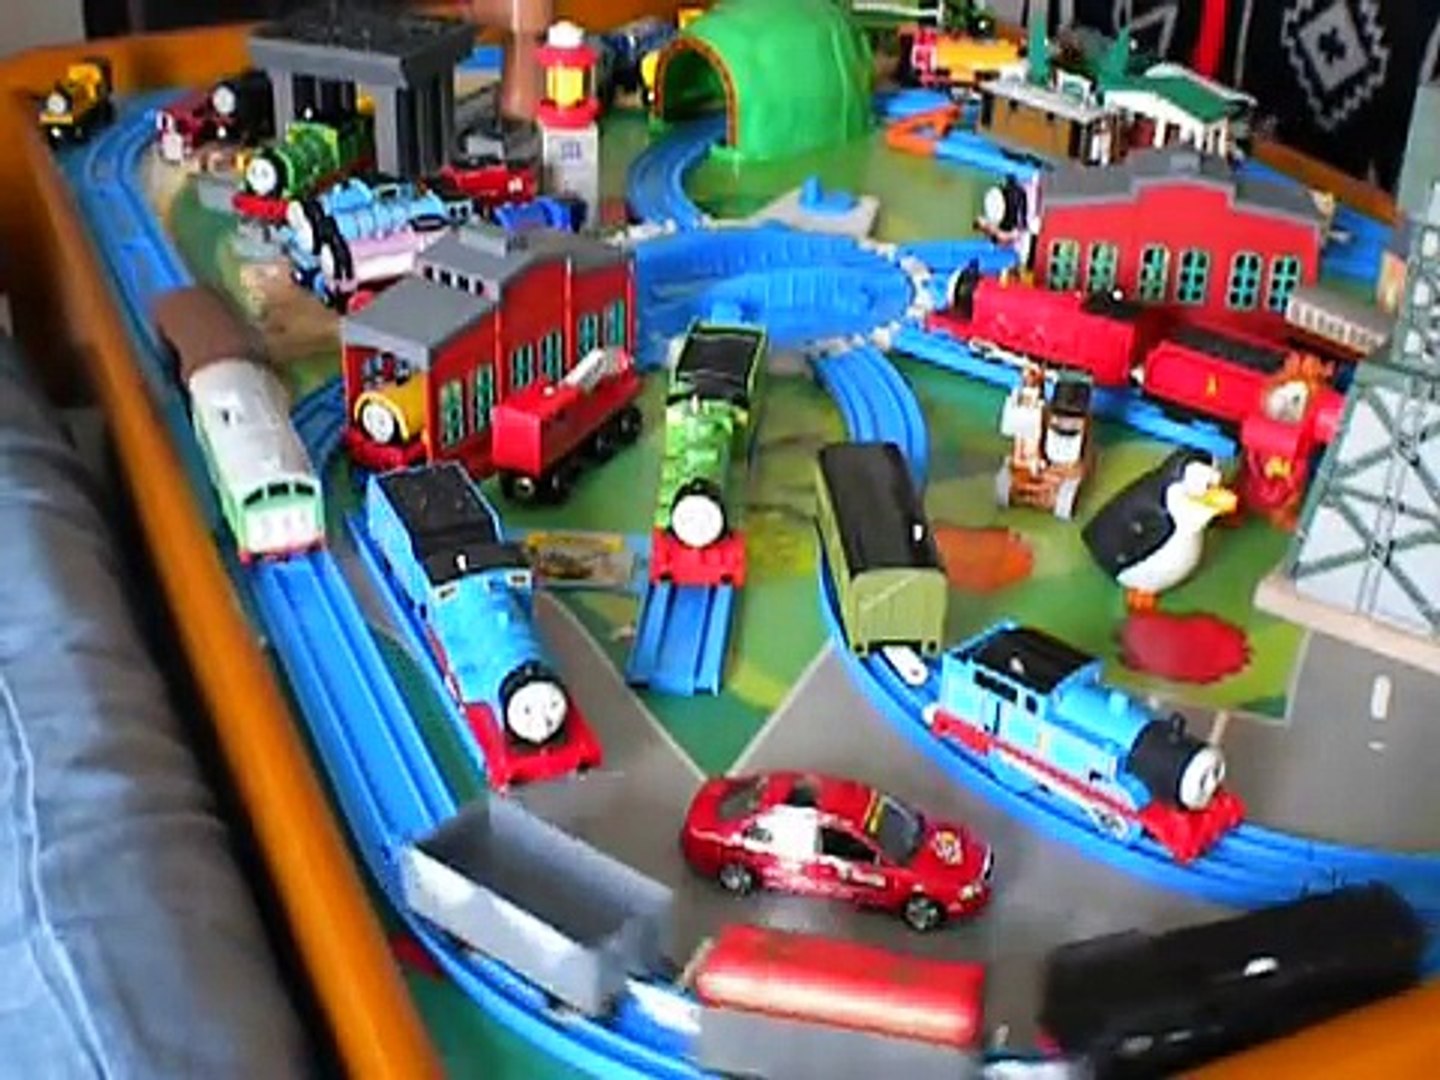 thomas and friends tomy toys